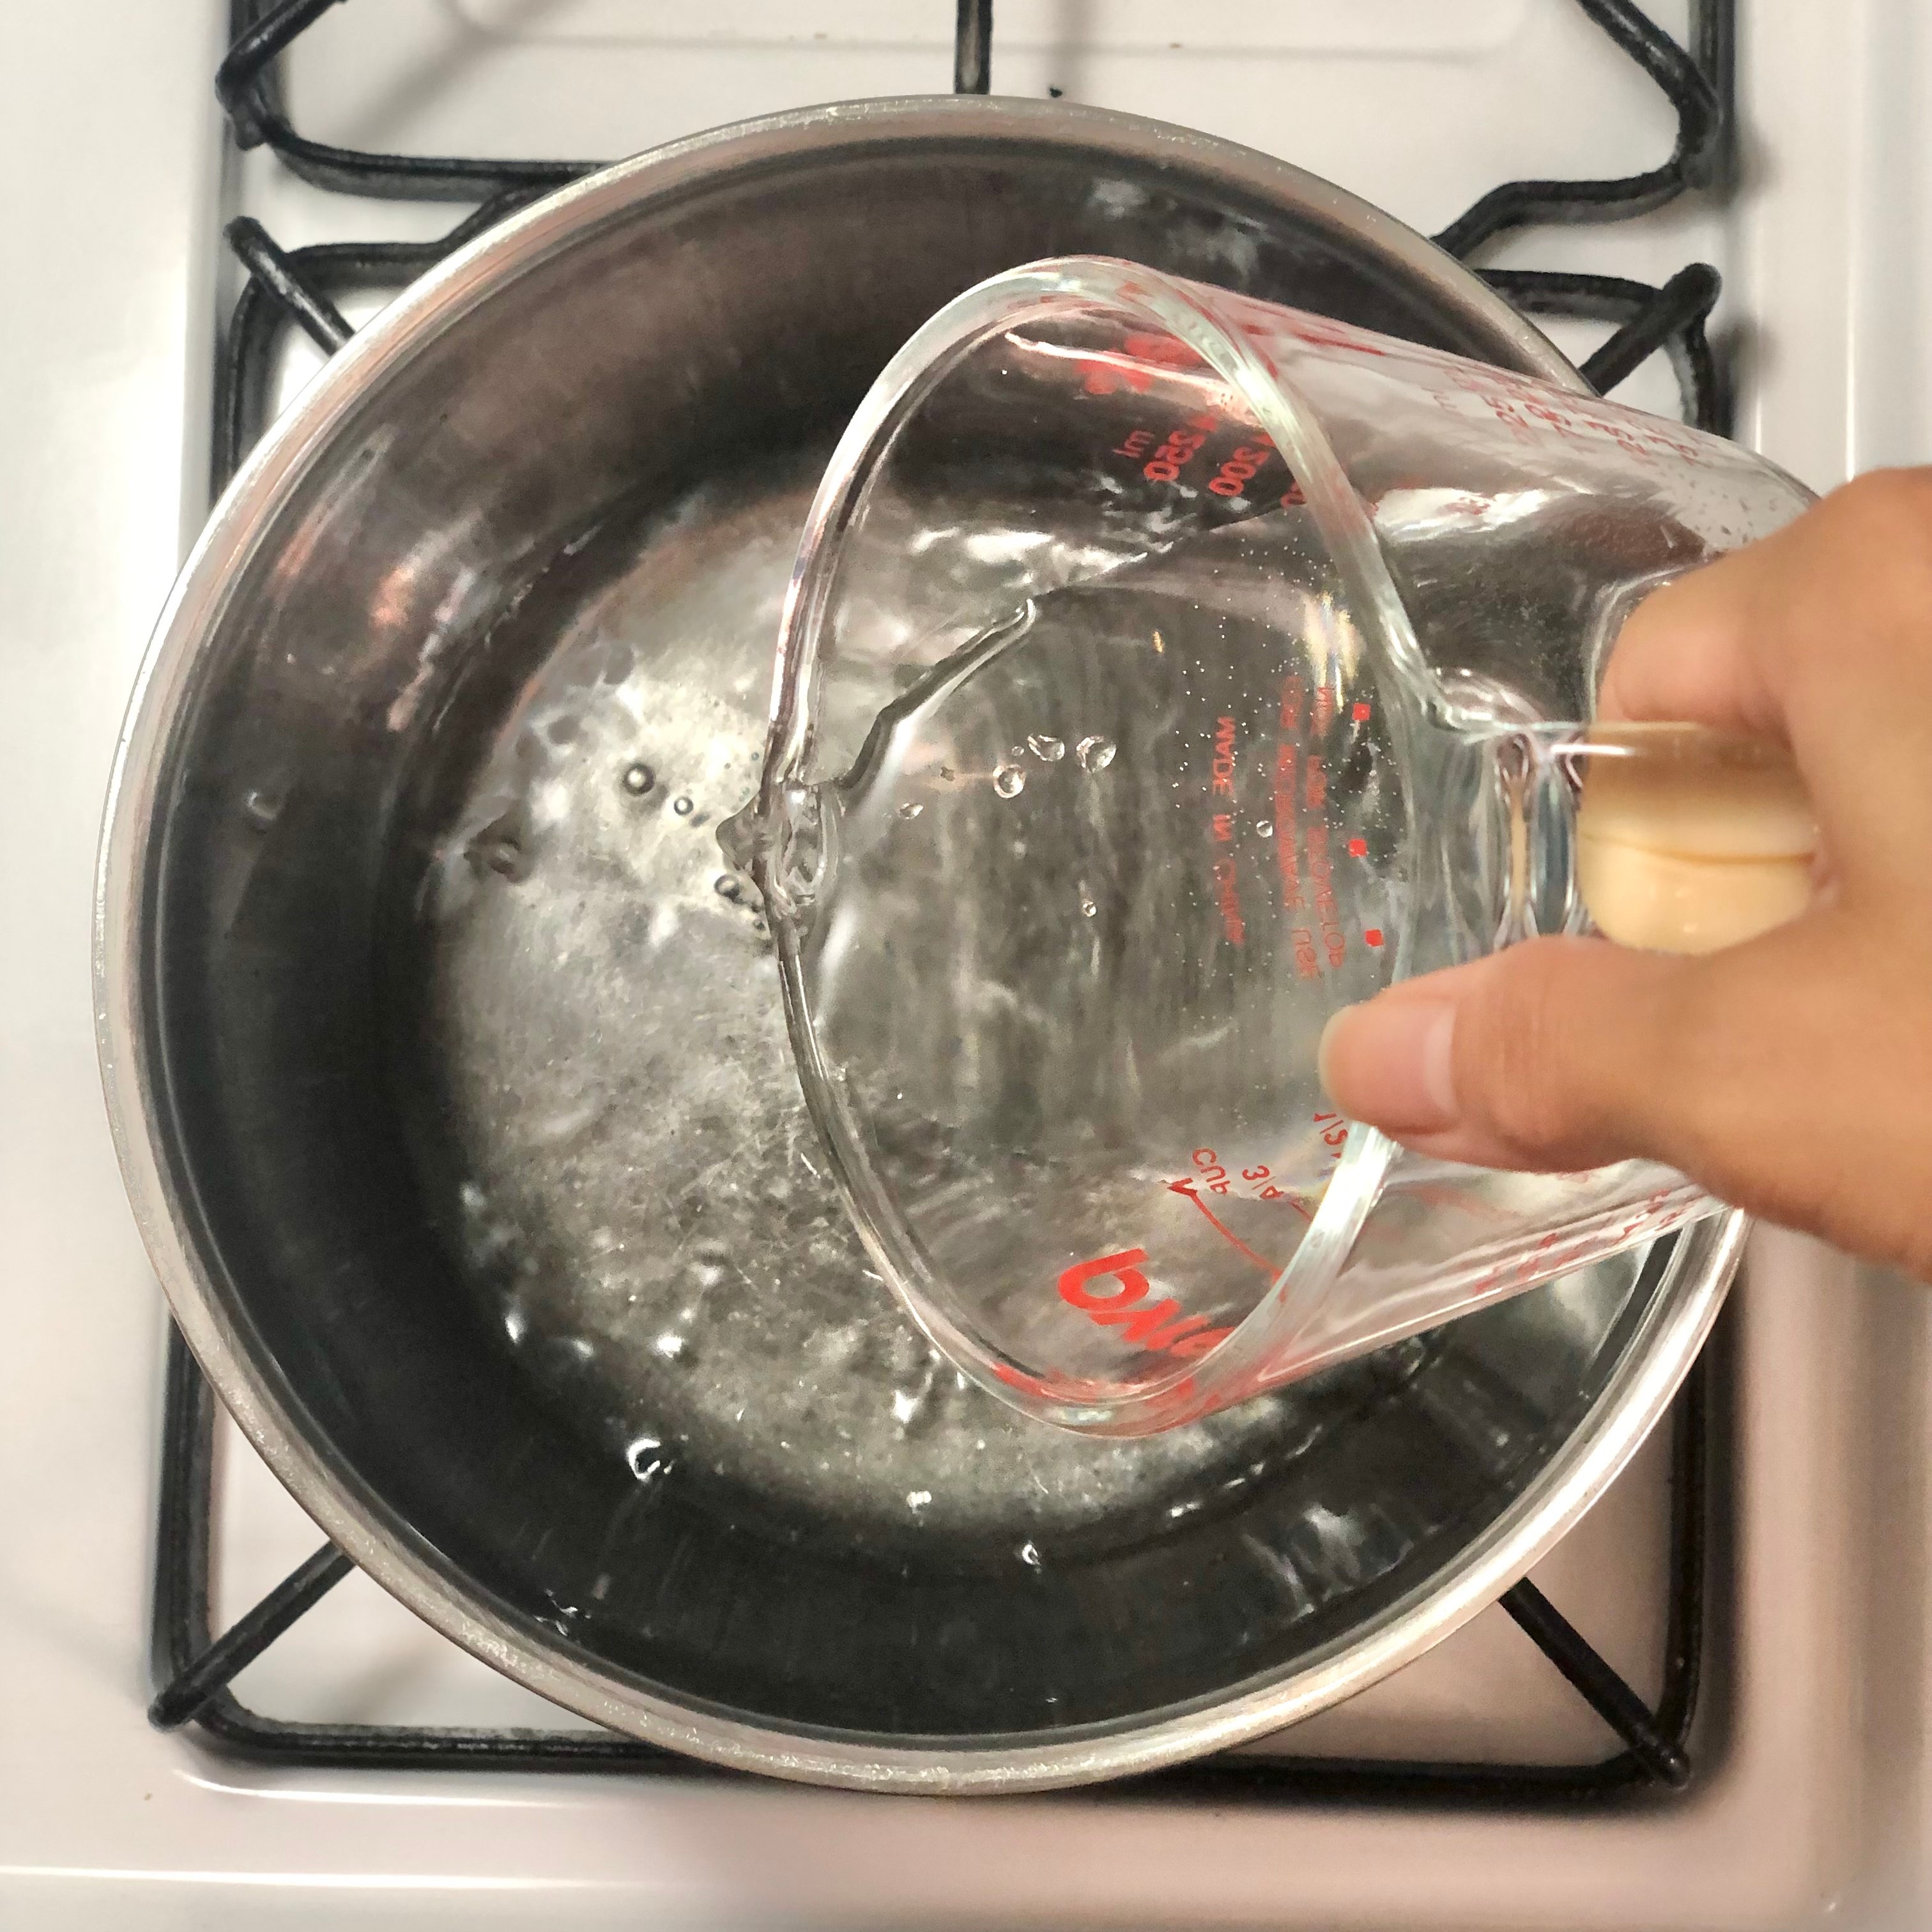 Adding water to a saucepan